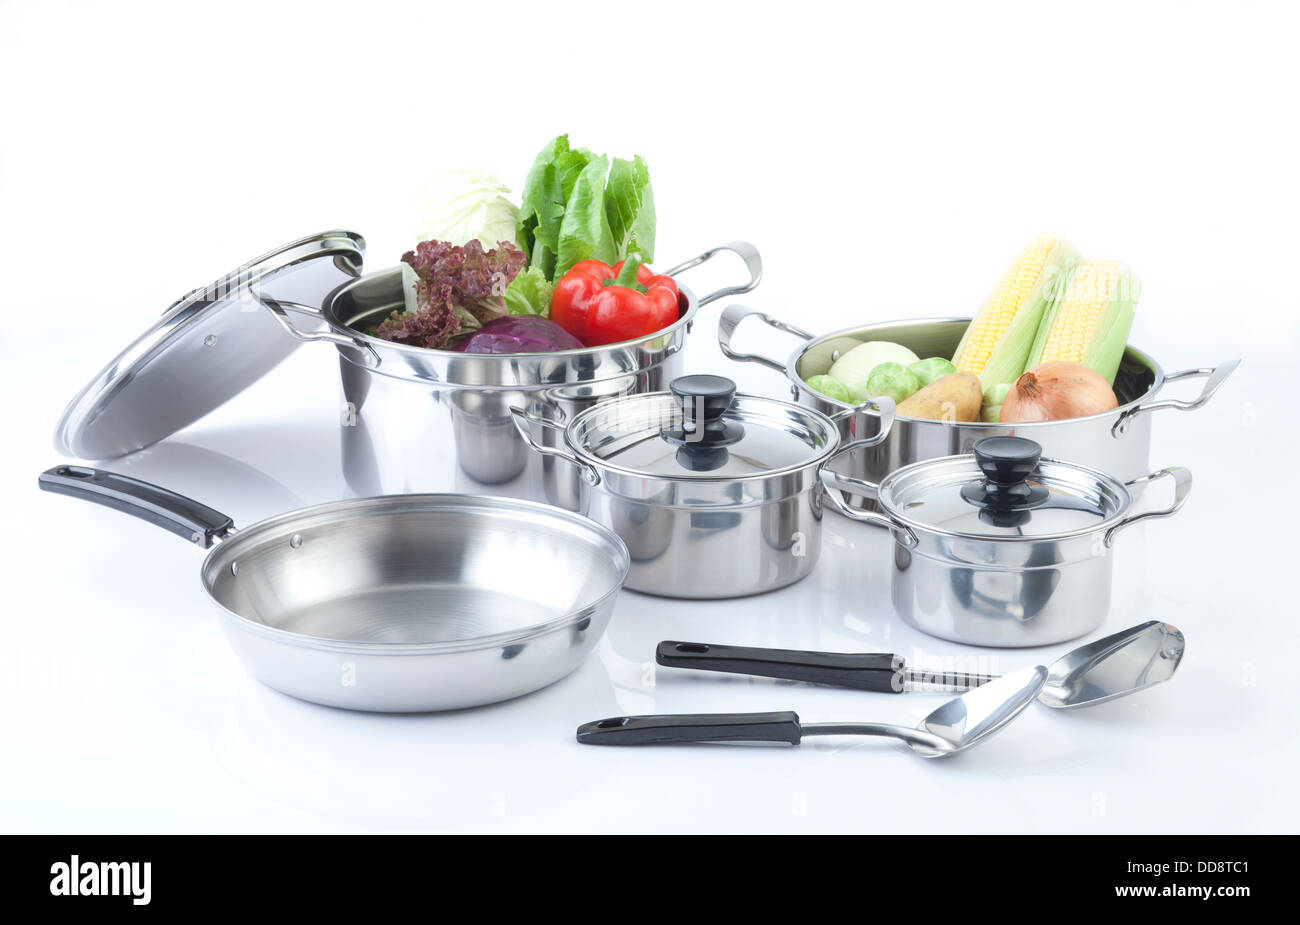 Set of stainless pots with lids and vegetables Stock Photo